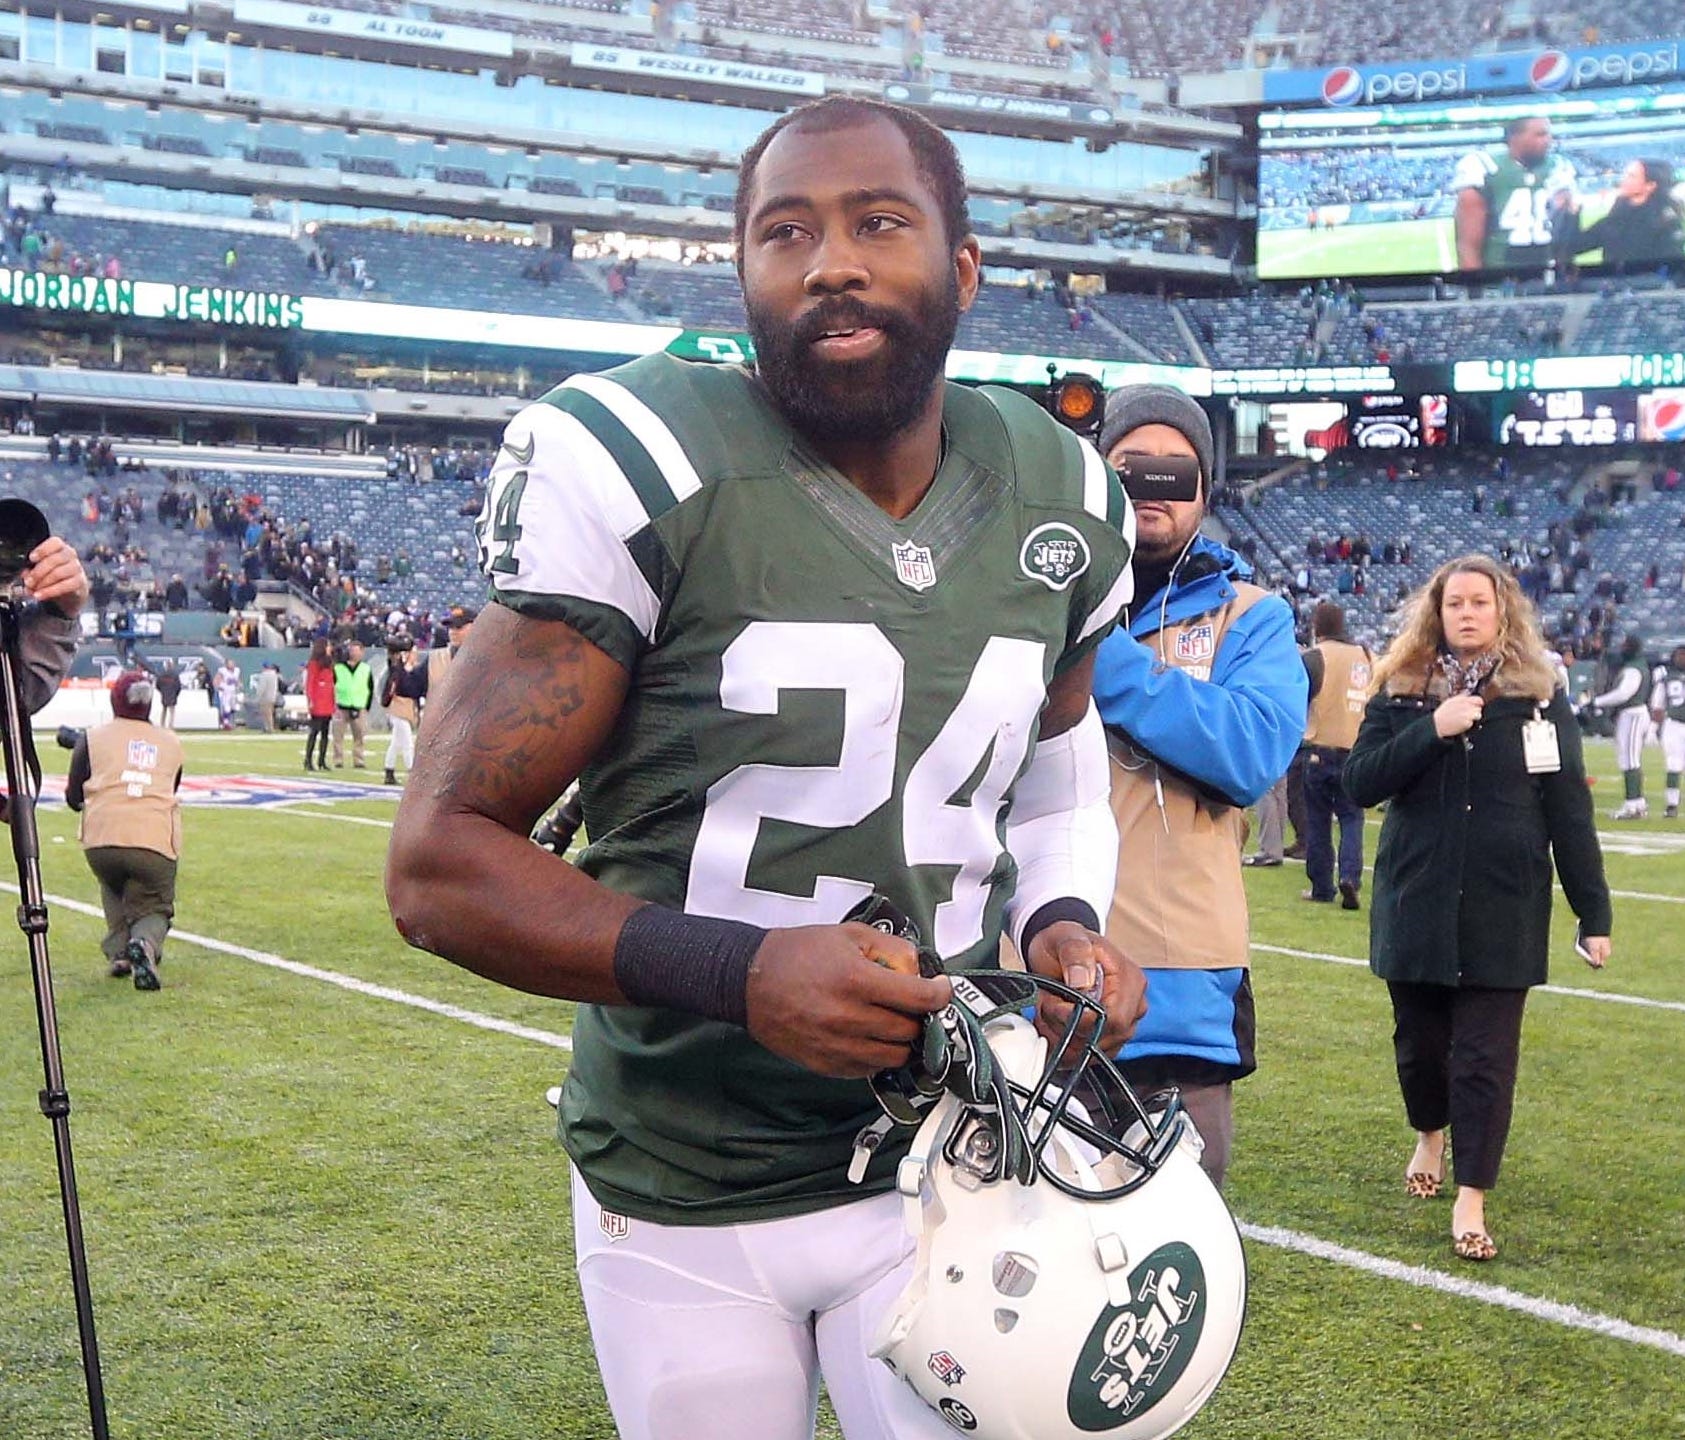 Darrelle Revis faces four felony charges in connection with the Feb. 12 altercation.